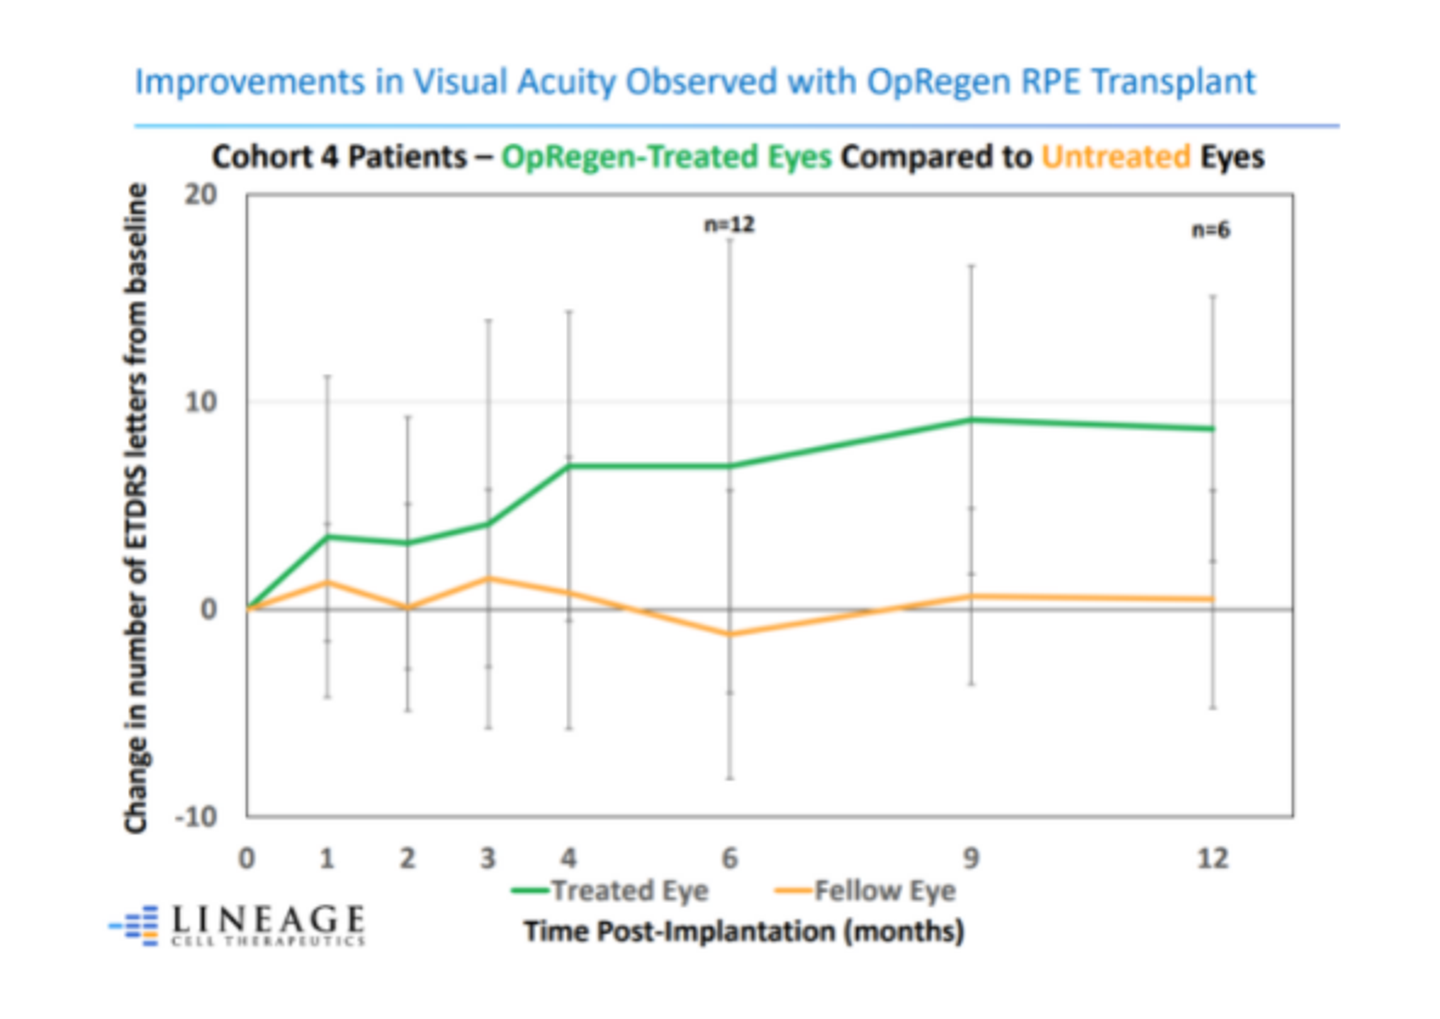 graph lineage.png?optimize=medium&dpr=1 Now, thanks to Lineage Cell Therapeutics Inc. (AMEX: LCTX), there is a lot more hope for the future of folks vulnerable to this disease. Lineage’s approach is focused on a retinal pigment epithelium (RPE) cell transplant, which aims to replace damaged retinal cells in patients who suffer from retinal lesions or degeneration. 